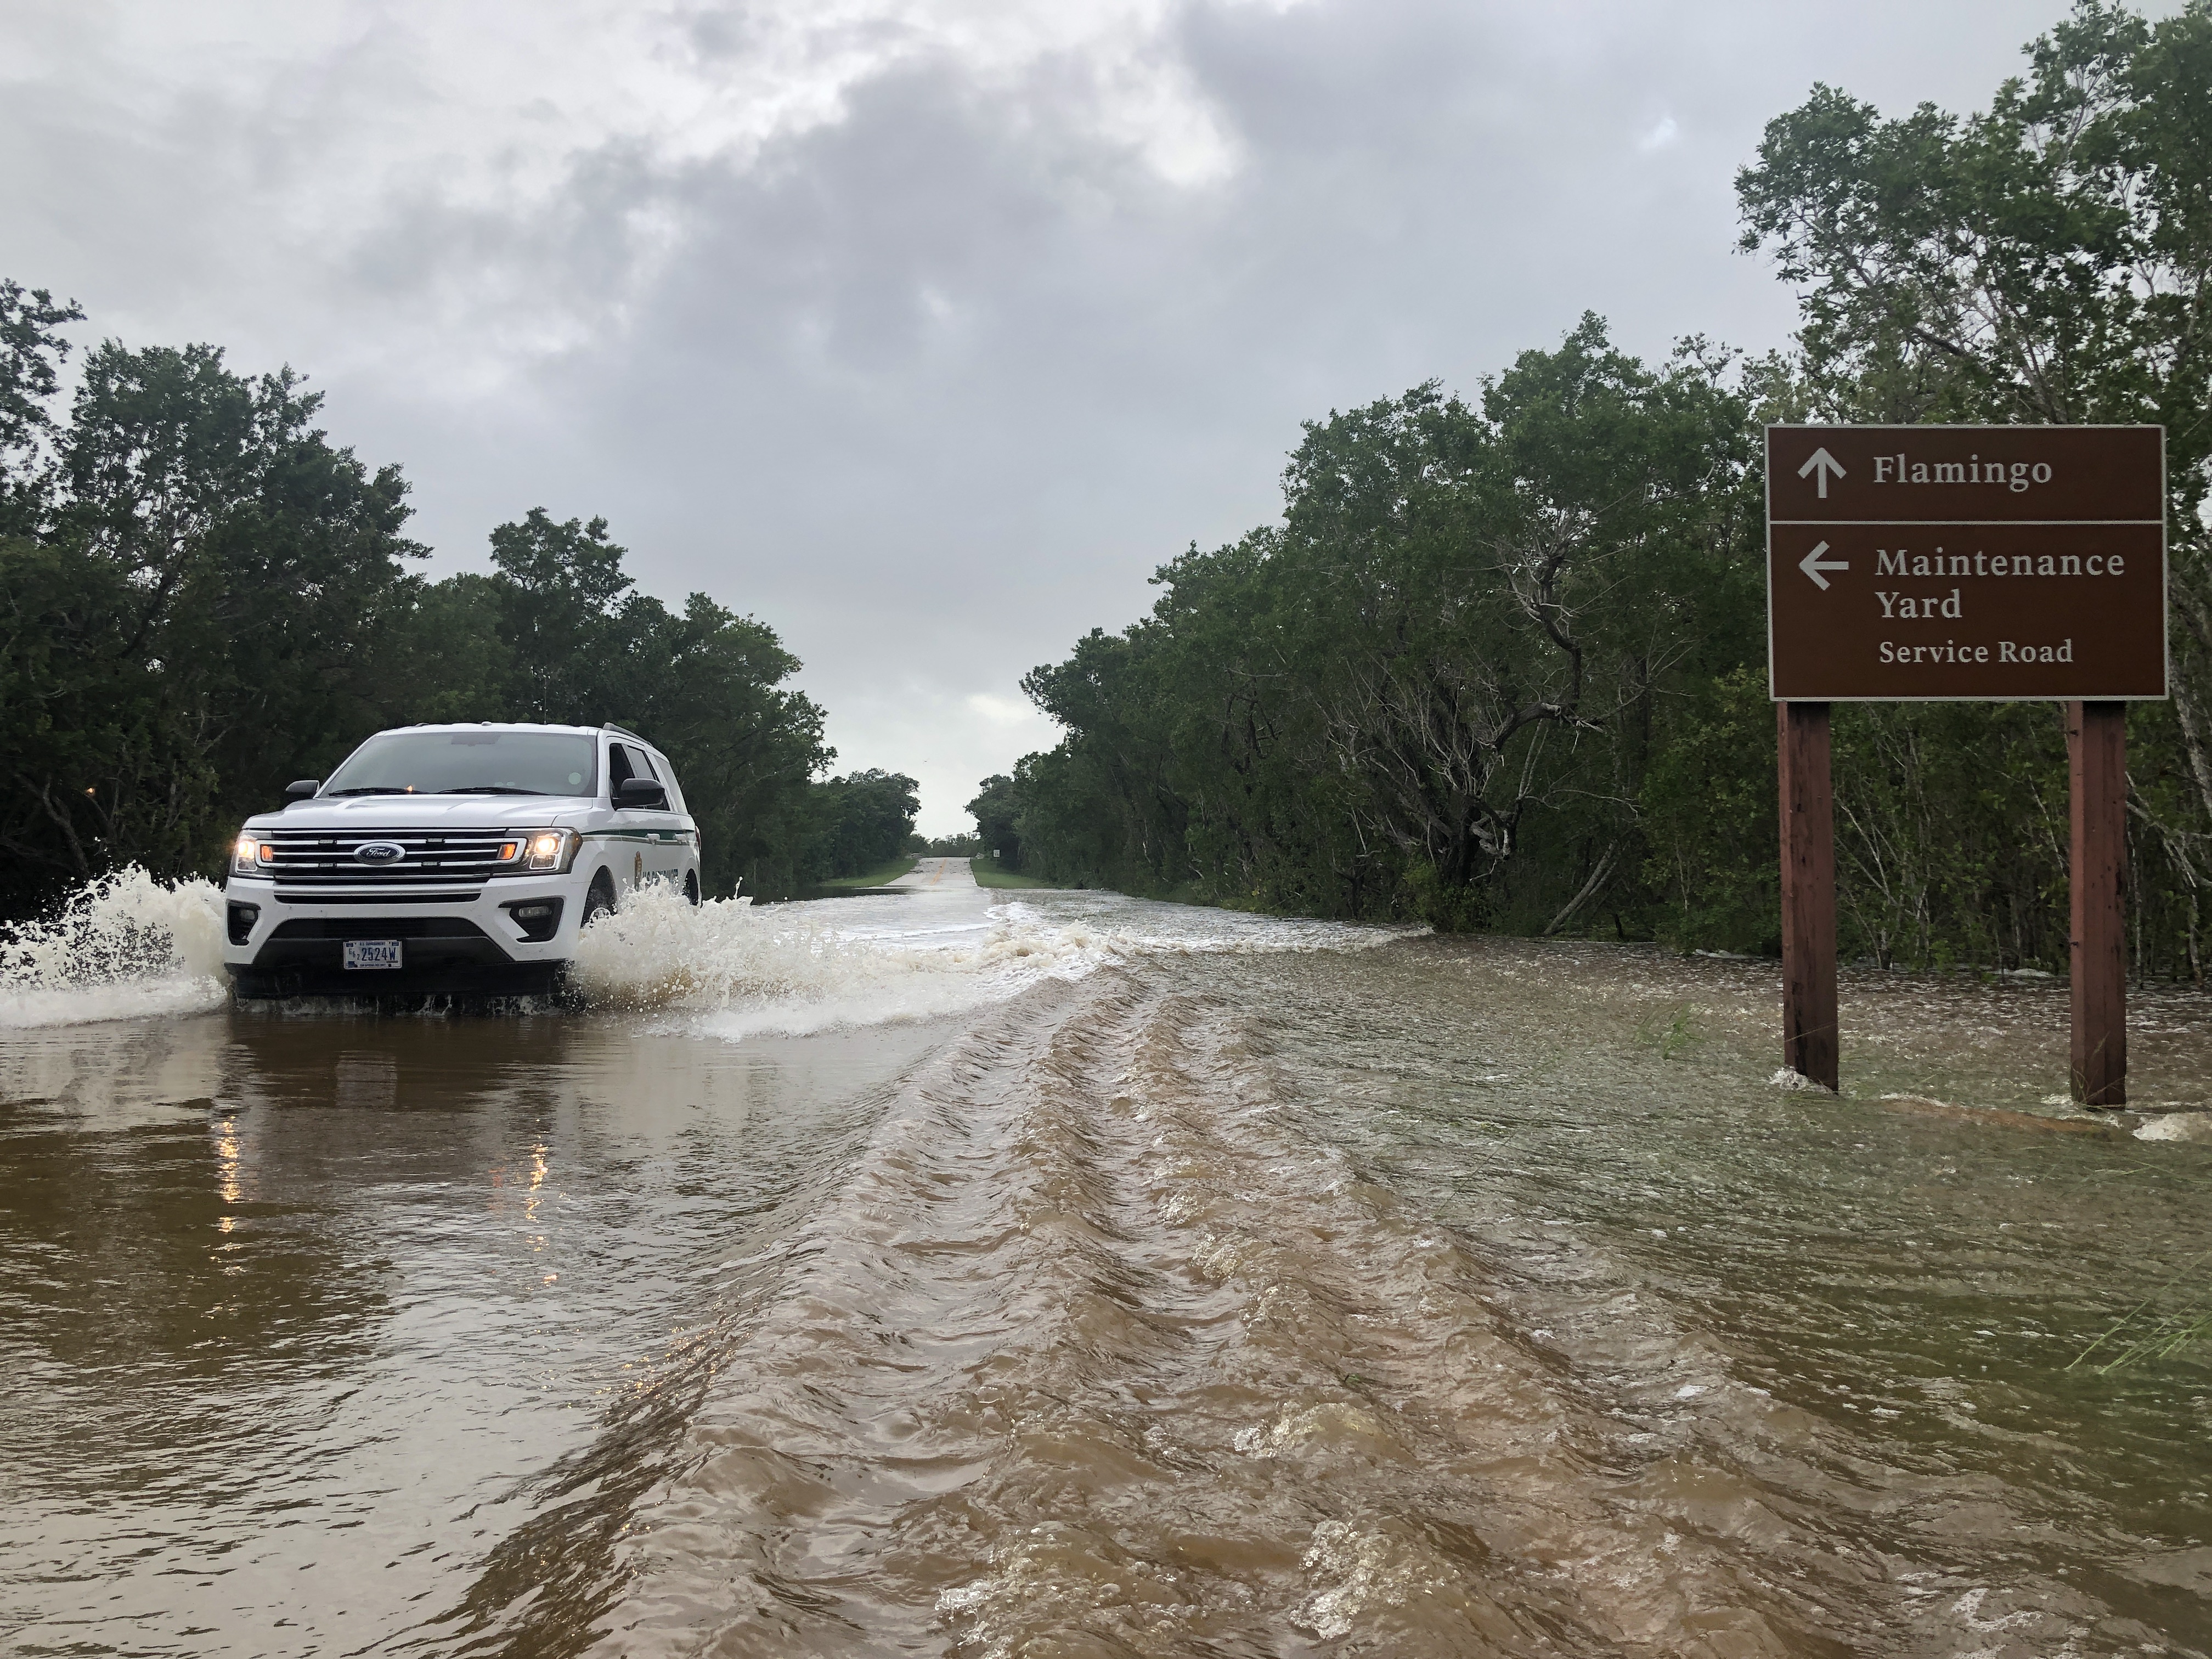 A park ranger vehicle drives through water past a sign with directional arrows for Flamingo and Maintenance Yard Service Road